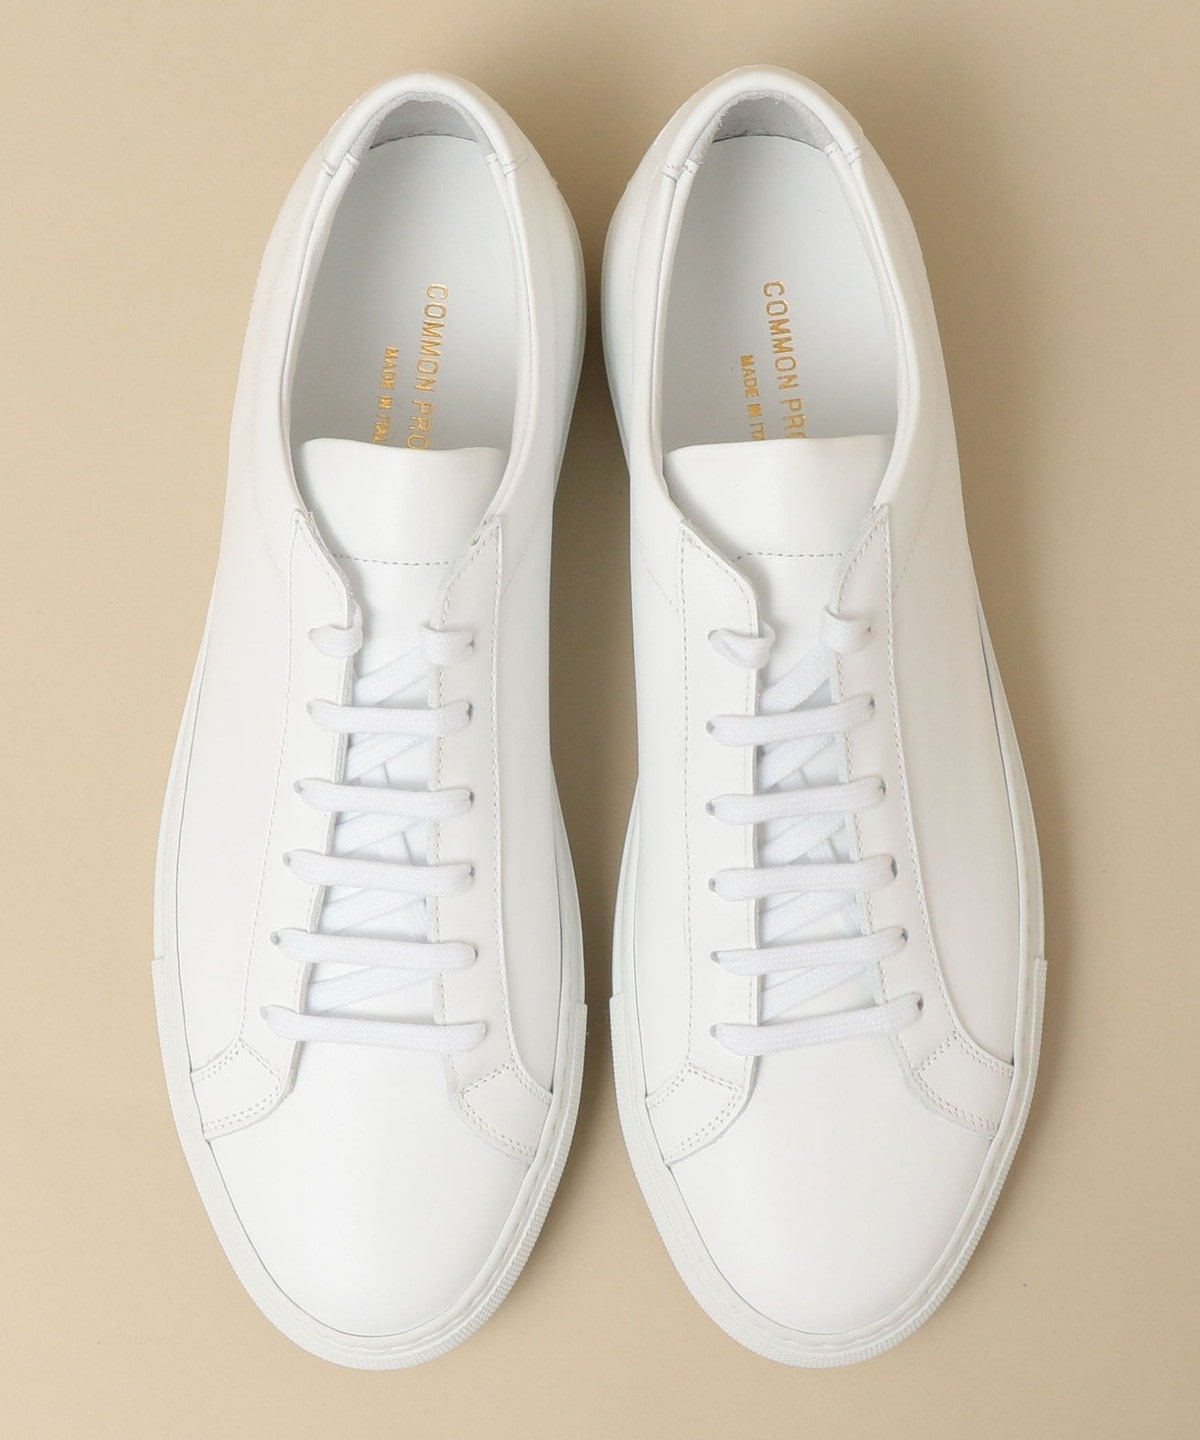 COMMON PROJECTS:ARTICLE LOW スニーカー: シューズ SHIPS 公式サイト 